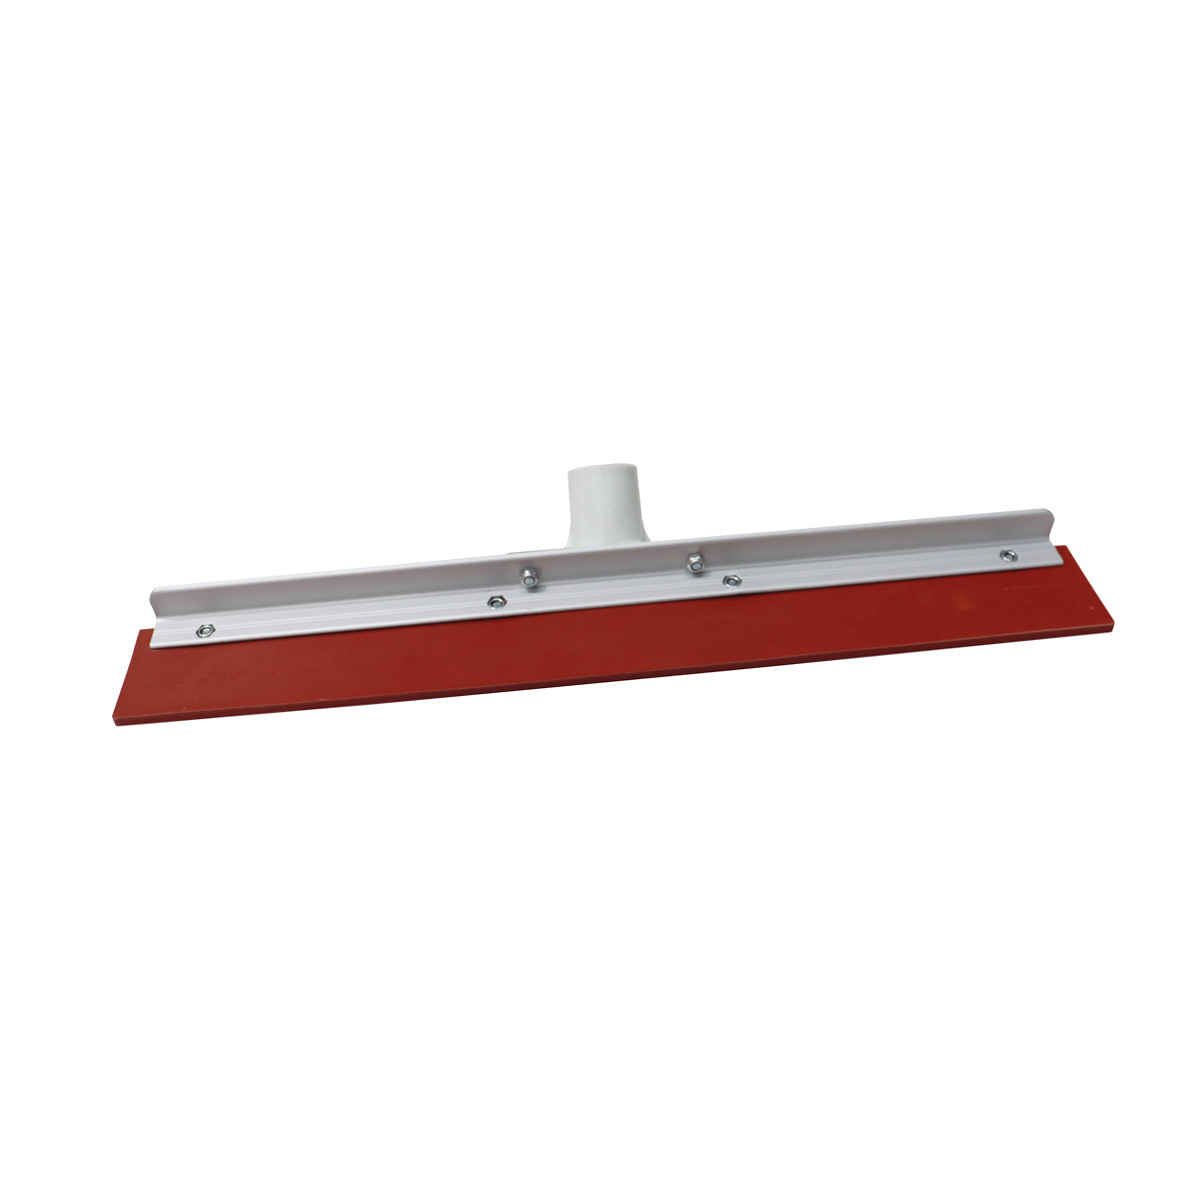 Oates Aluminium Squeegee, Red Rubber, 450mm